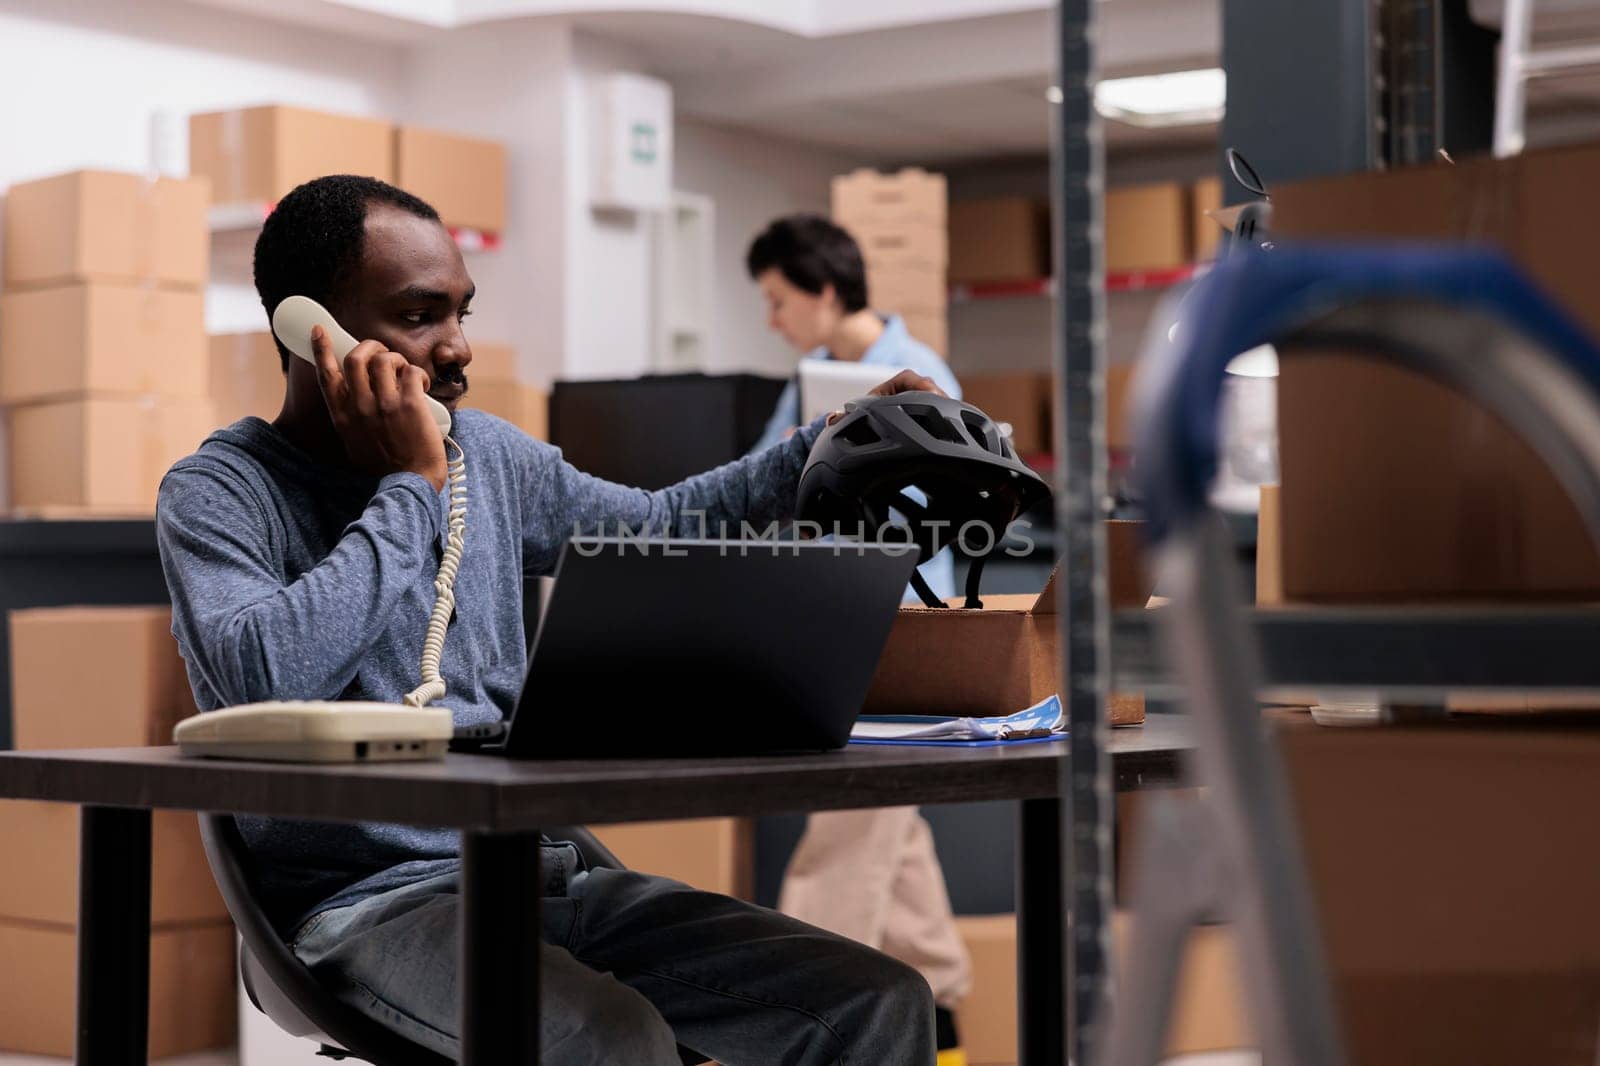 Warehouse supervisor talking at landline phone discussing transportation problem with remote manager by DCStudio